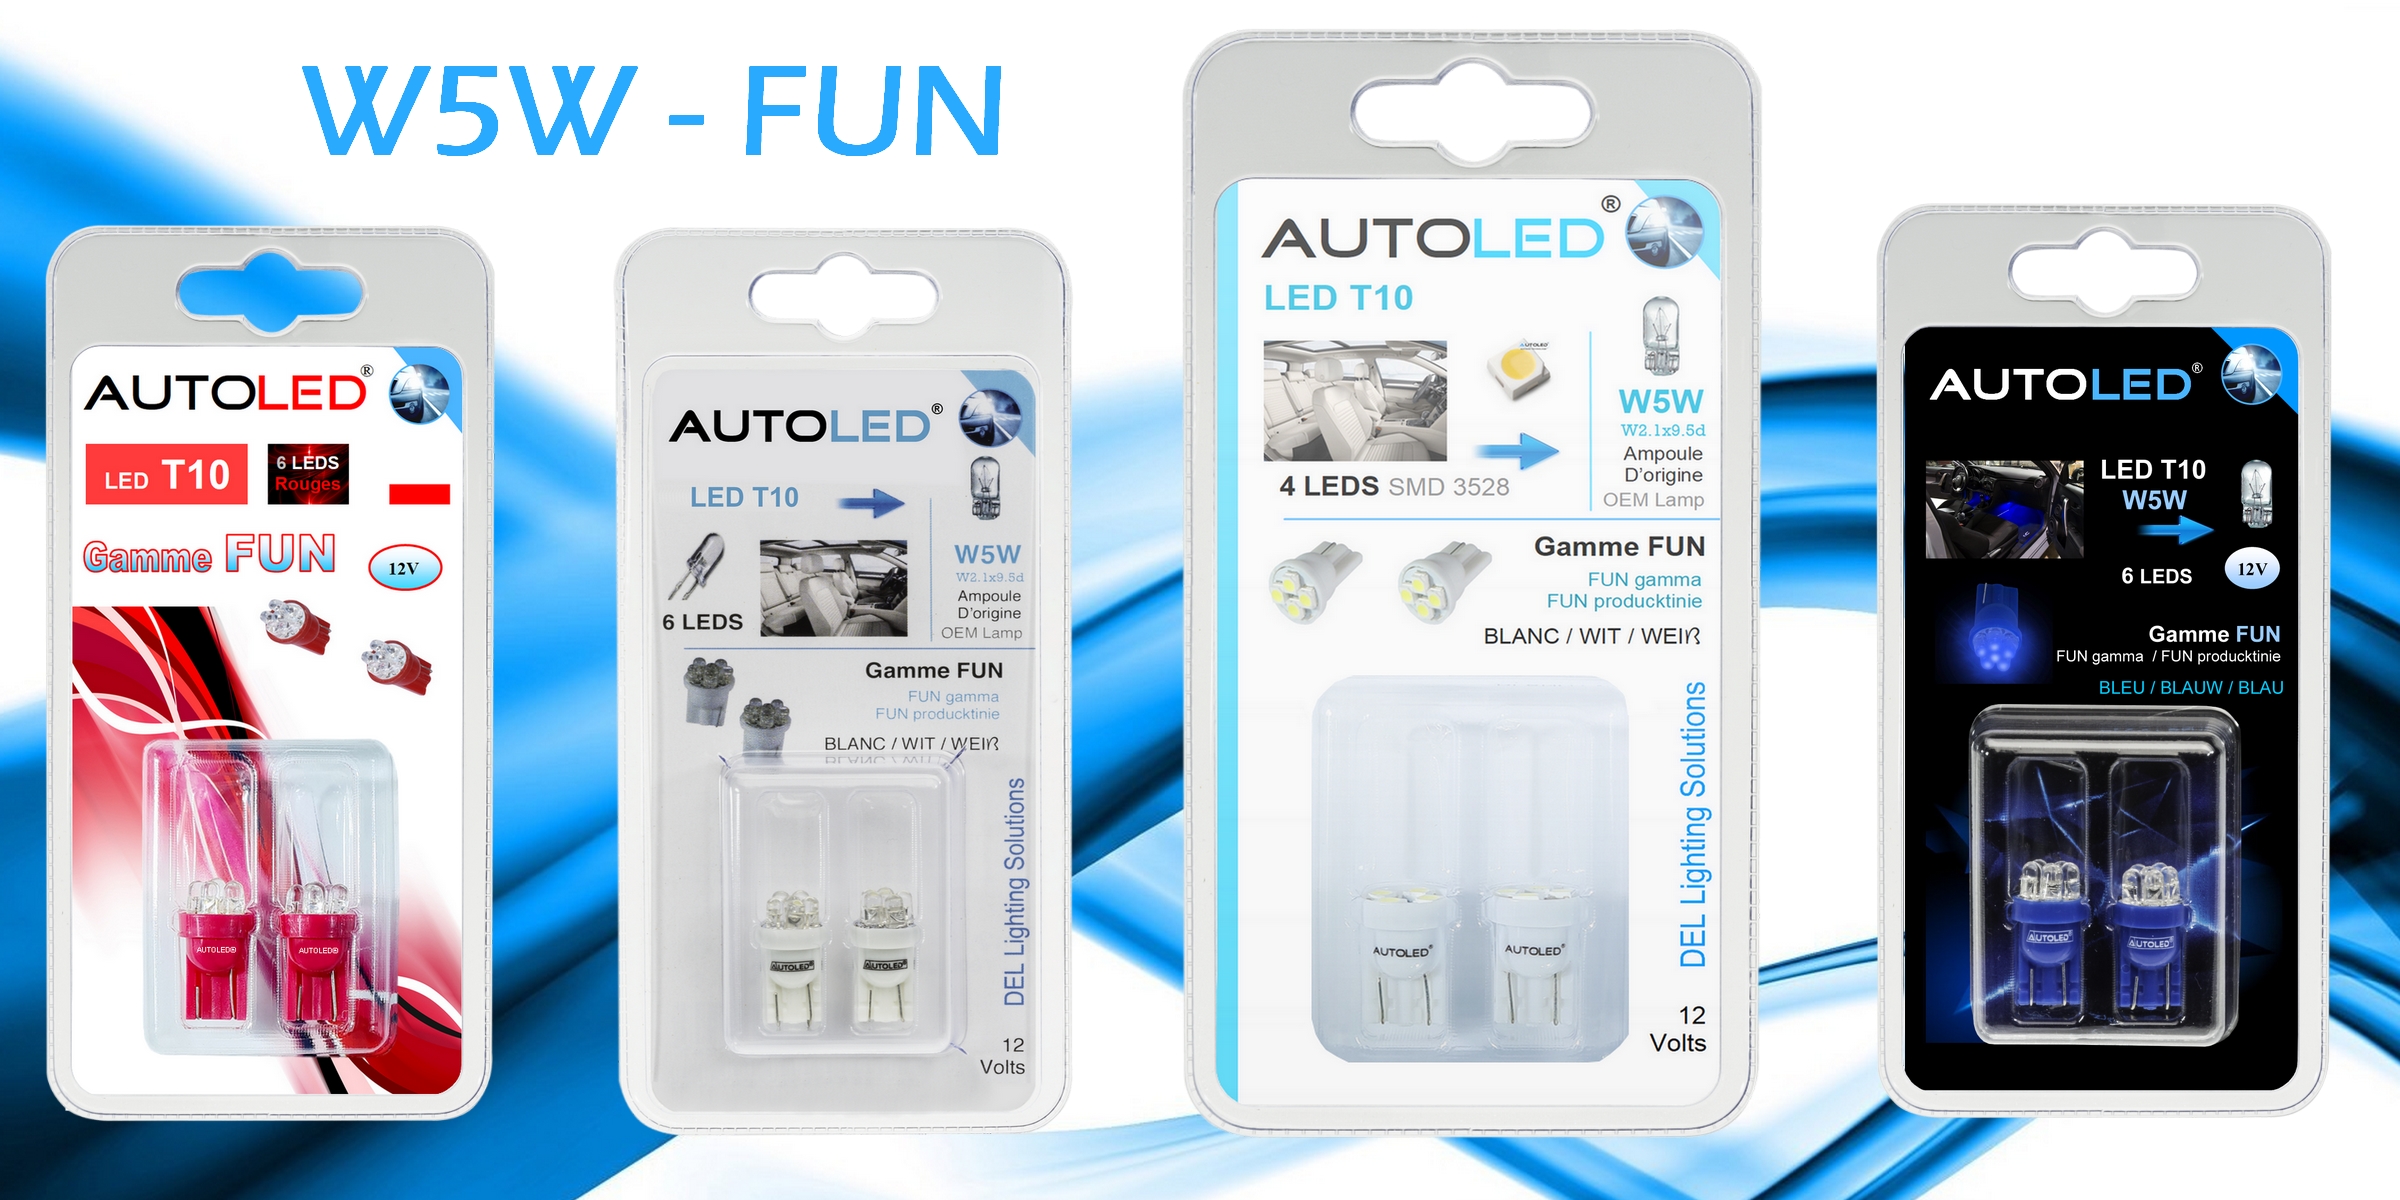 Ampoule w5w led gamme FUN autoled - 5